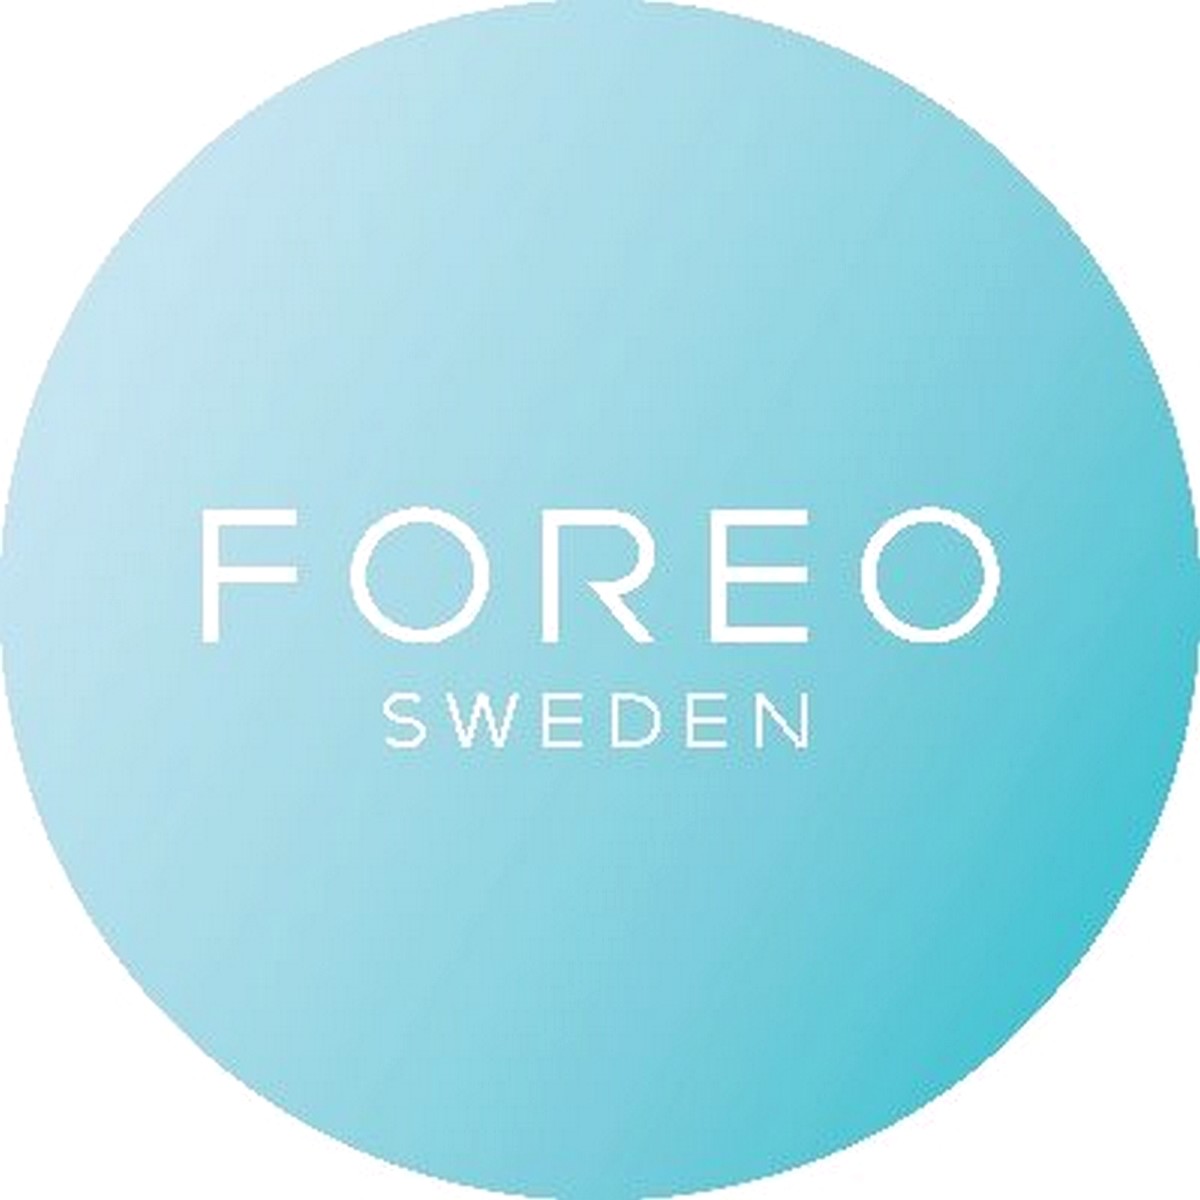 FOREO-LOGO-SWEDEN Now till 31 May 2020: FOREO Online Sale! 15% off Sitewide Promo Code! EverydayOnSales Exclusive!